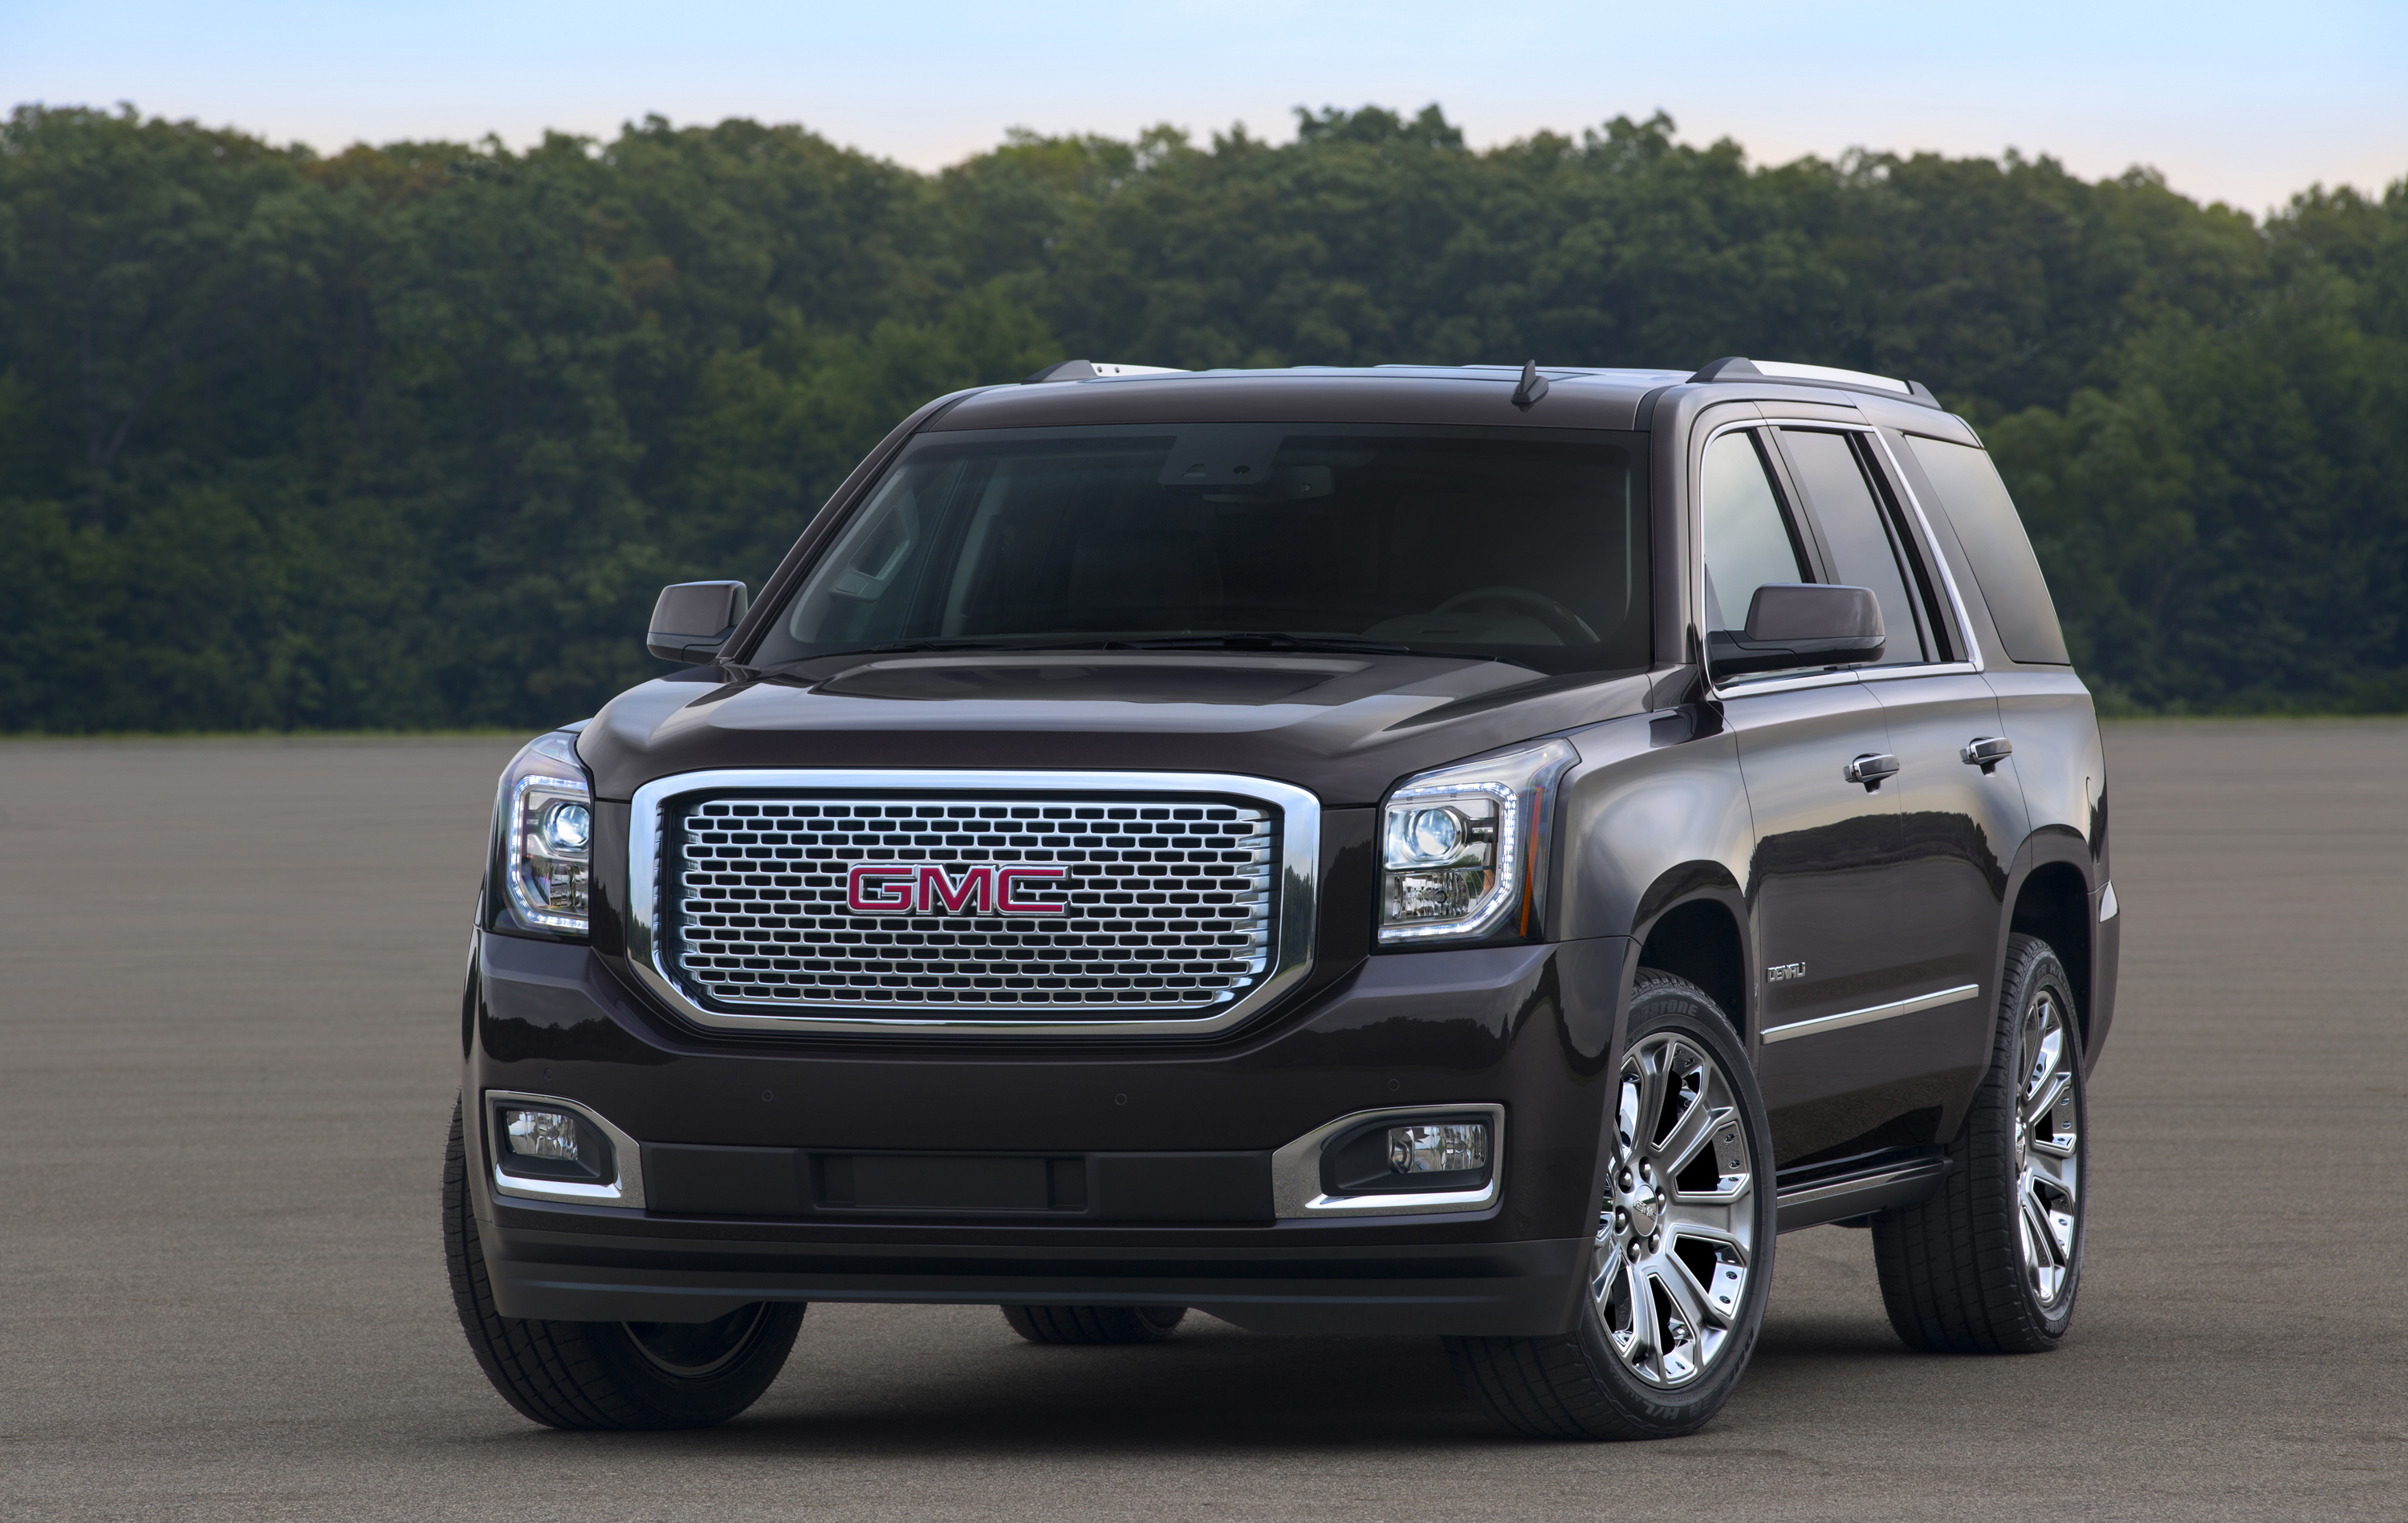 GMC Heads to the 2014 Pro Bowl and Super Bowl XLVIII